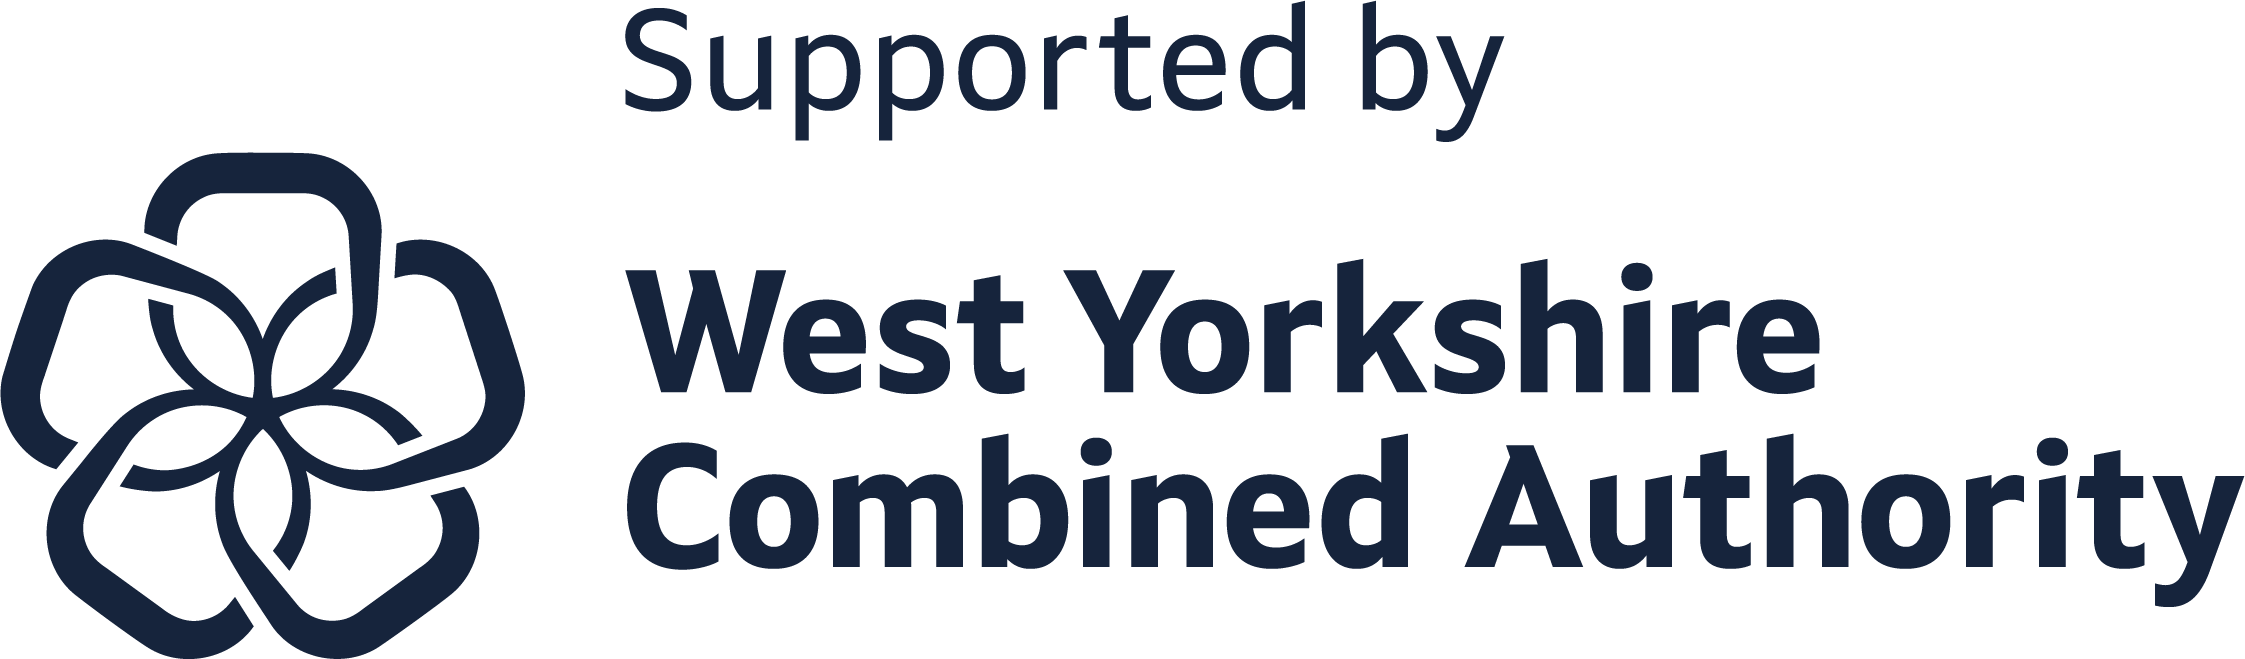 Supported by West Yorkshire Combined Authority